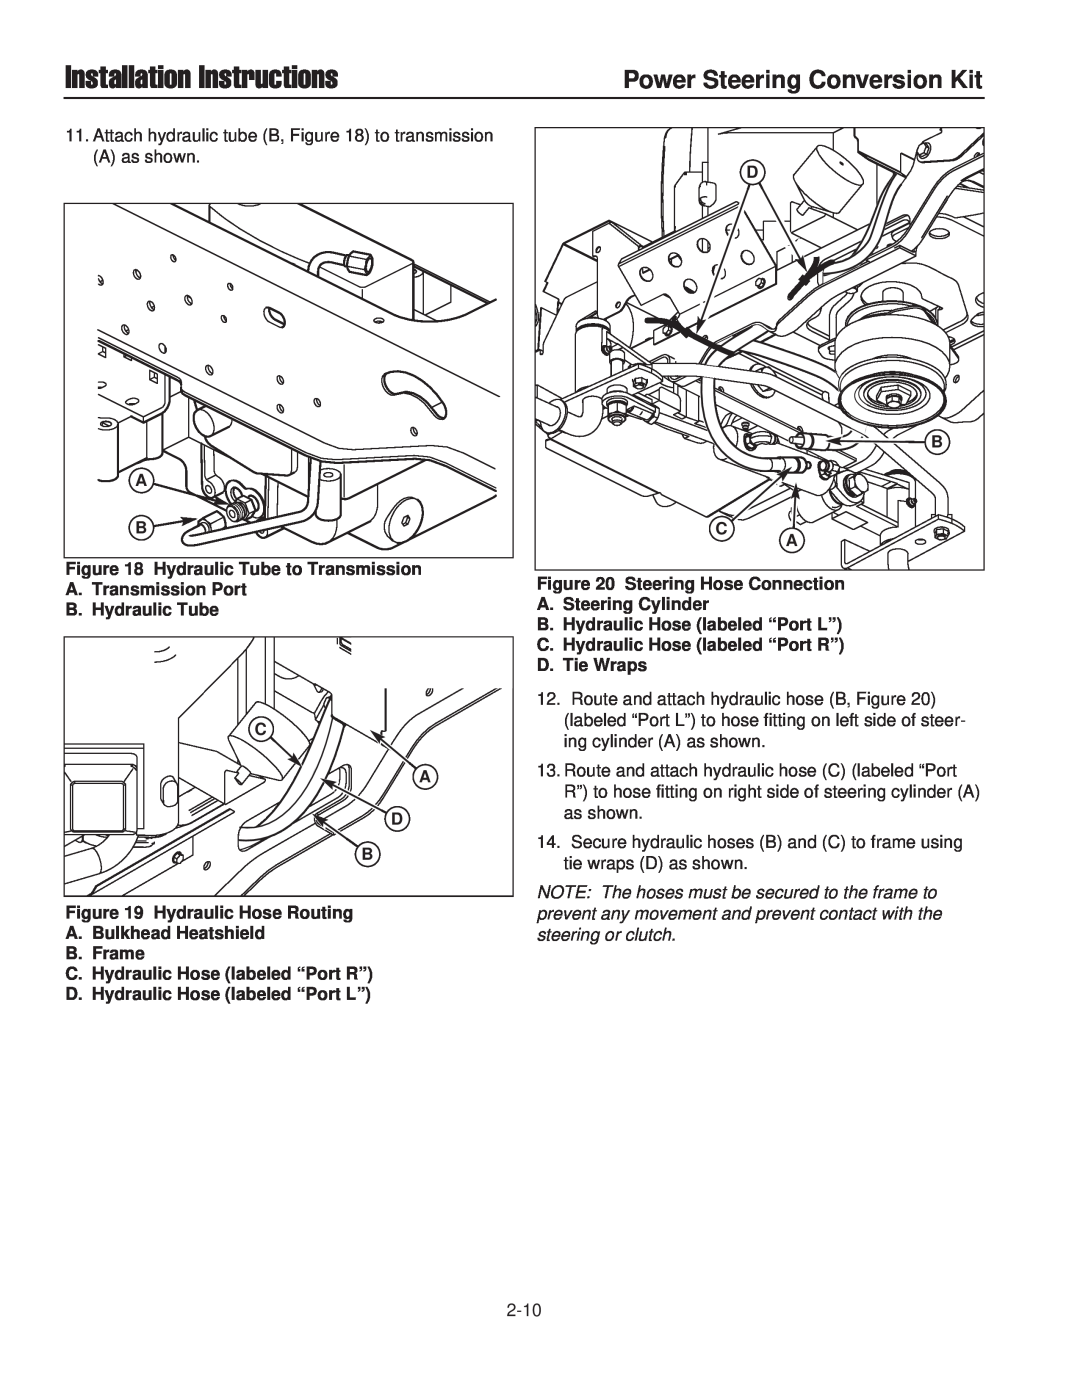 Briggs & Stratton 1687286 Installation Instructions, Power Steering Conversion Kit, Hydraulic Tube to Transmission 